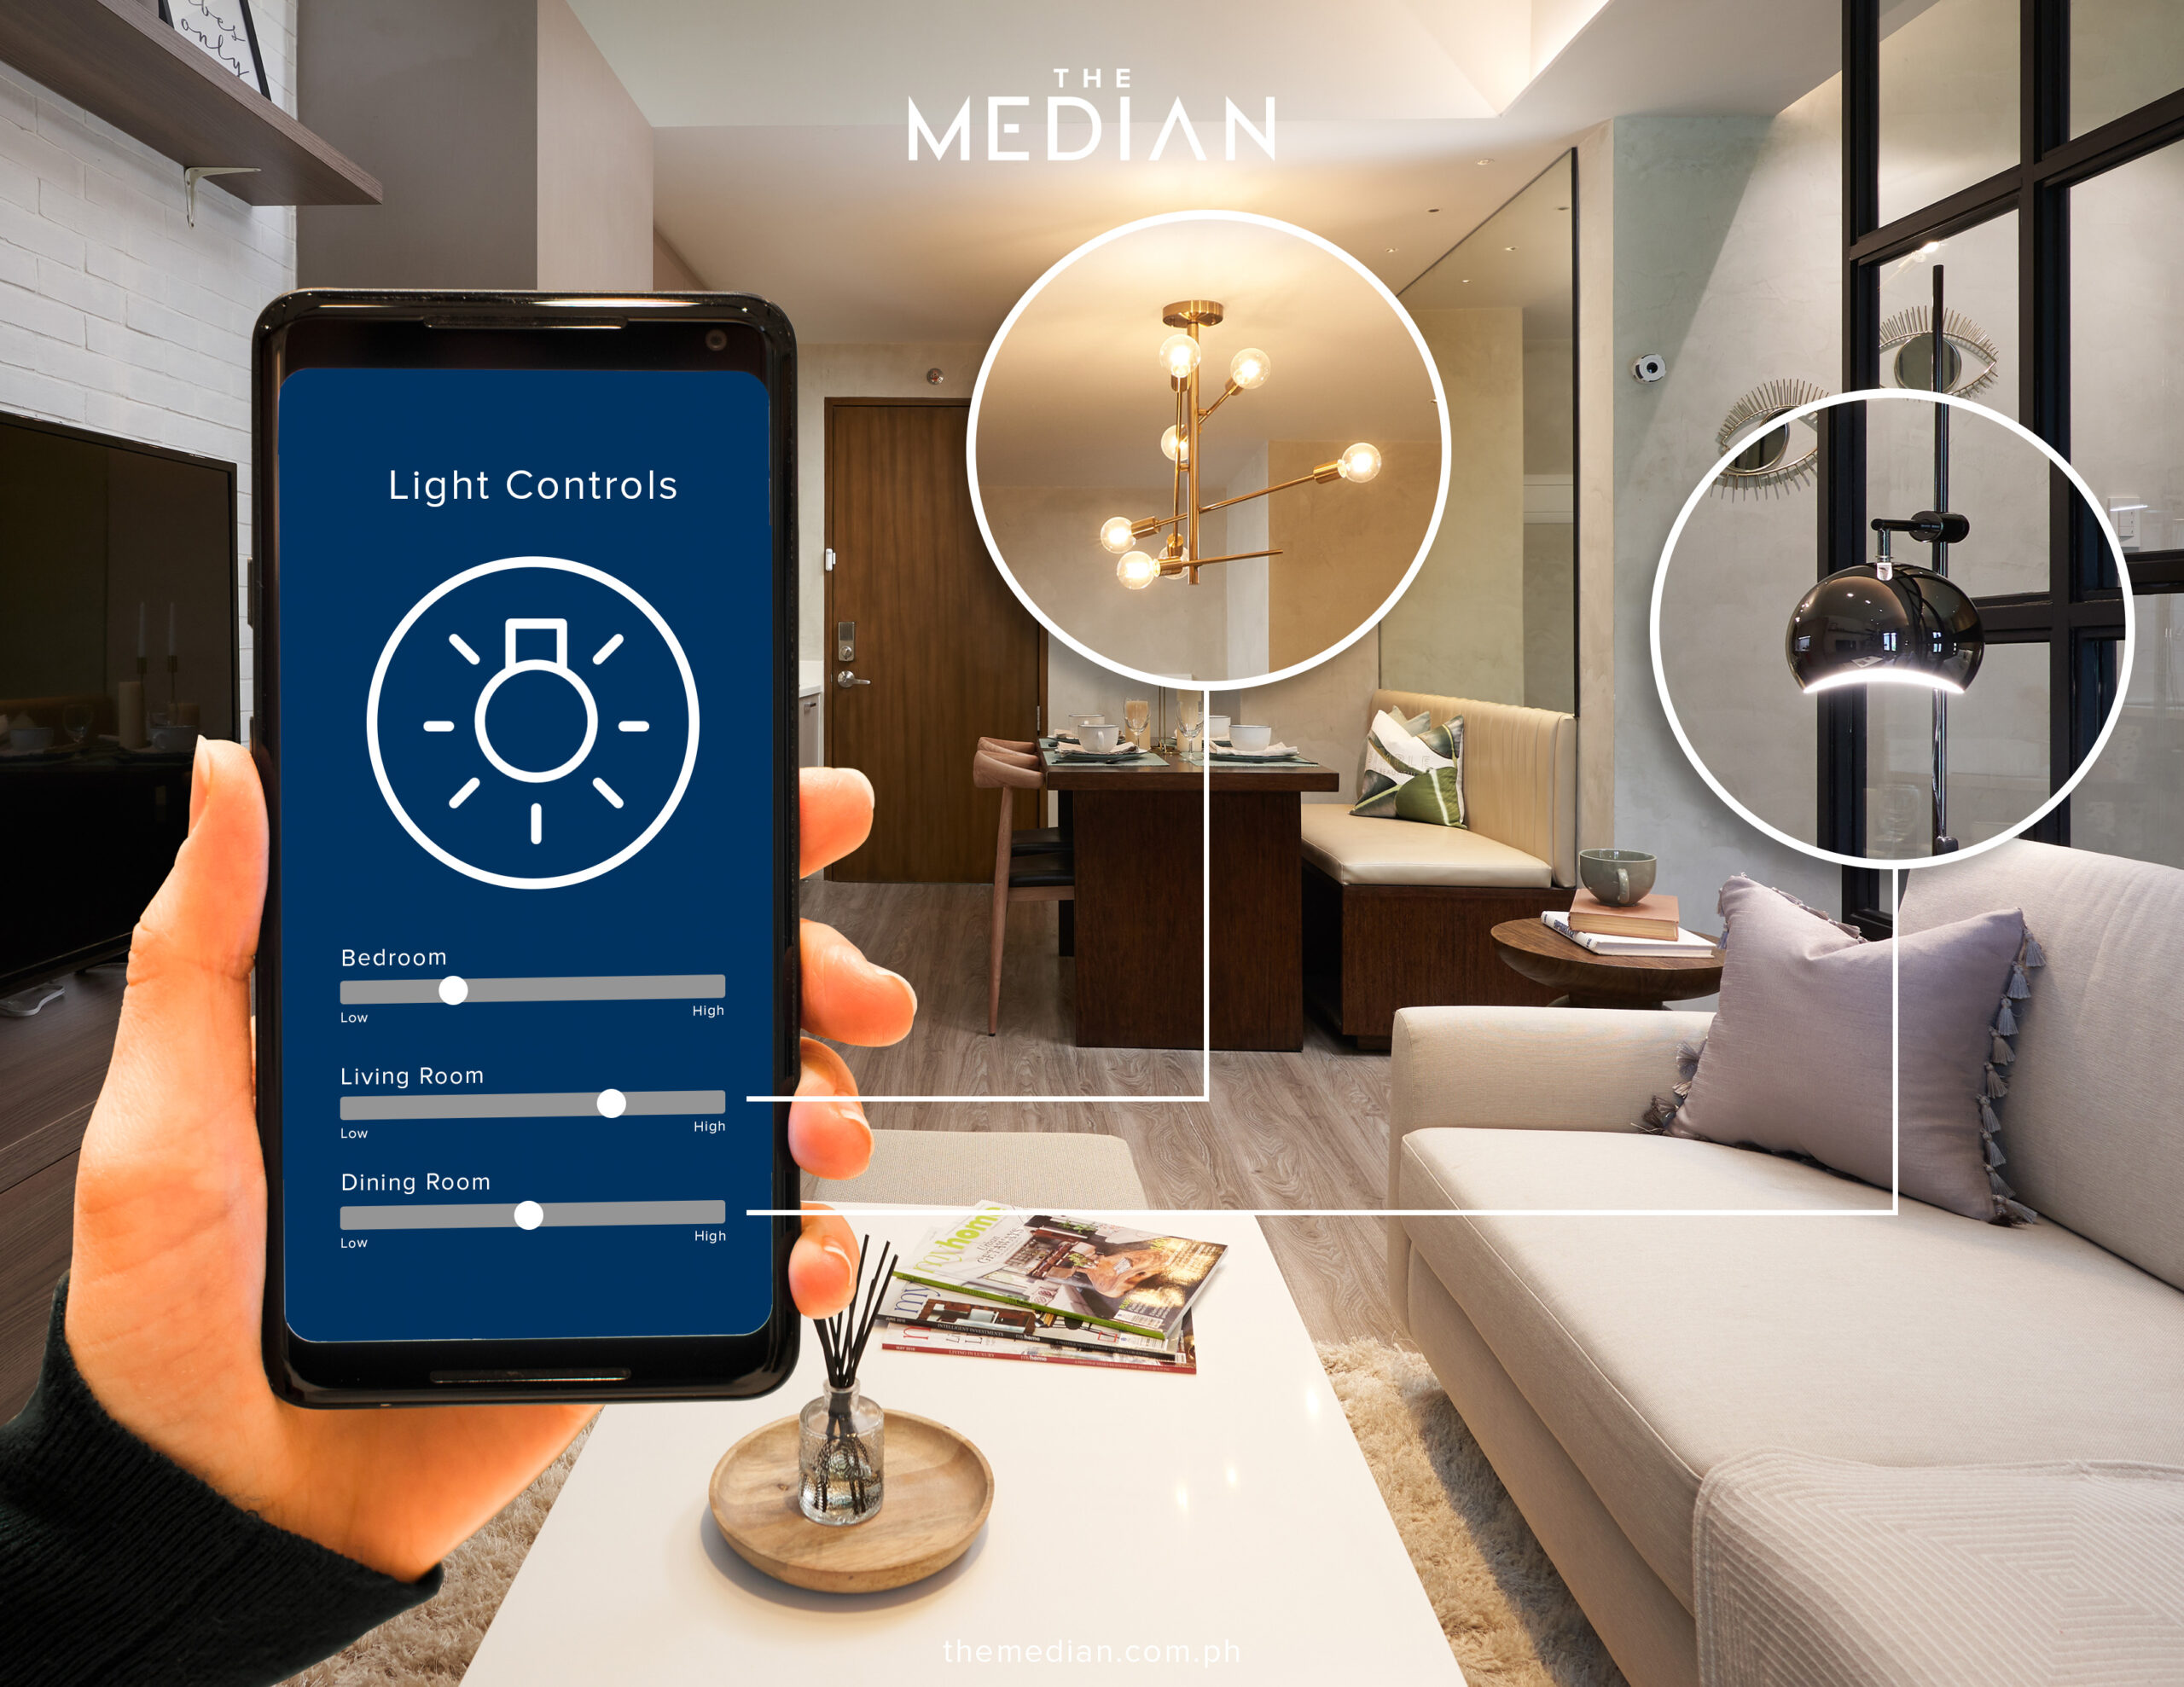 The Median’s Smart Home Basic Features, Functions & Benefits Explained